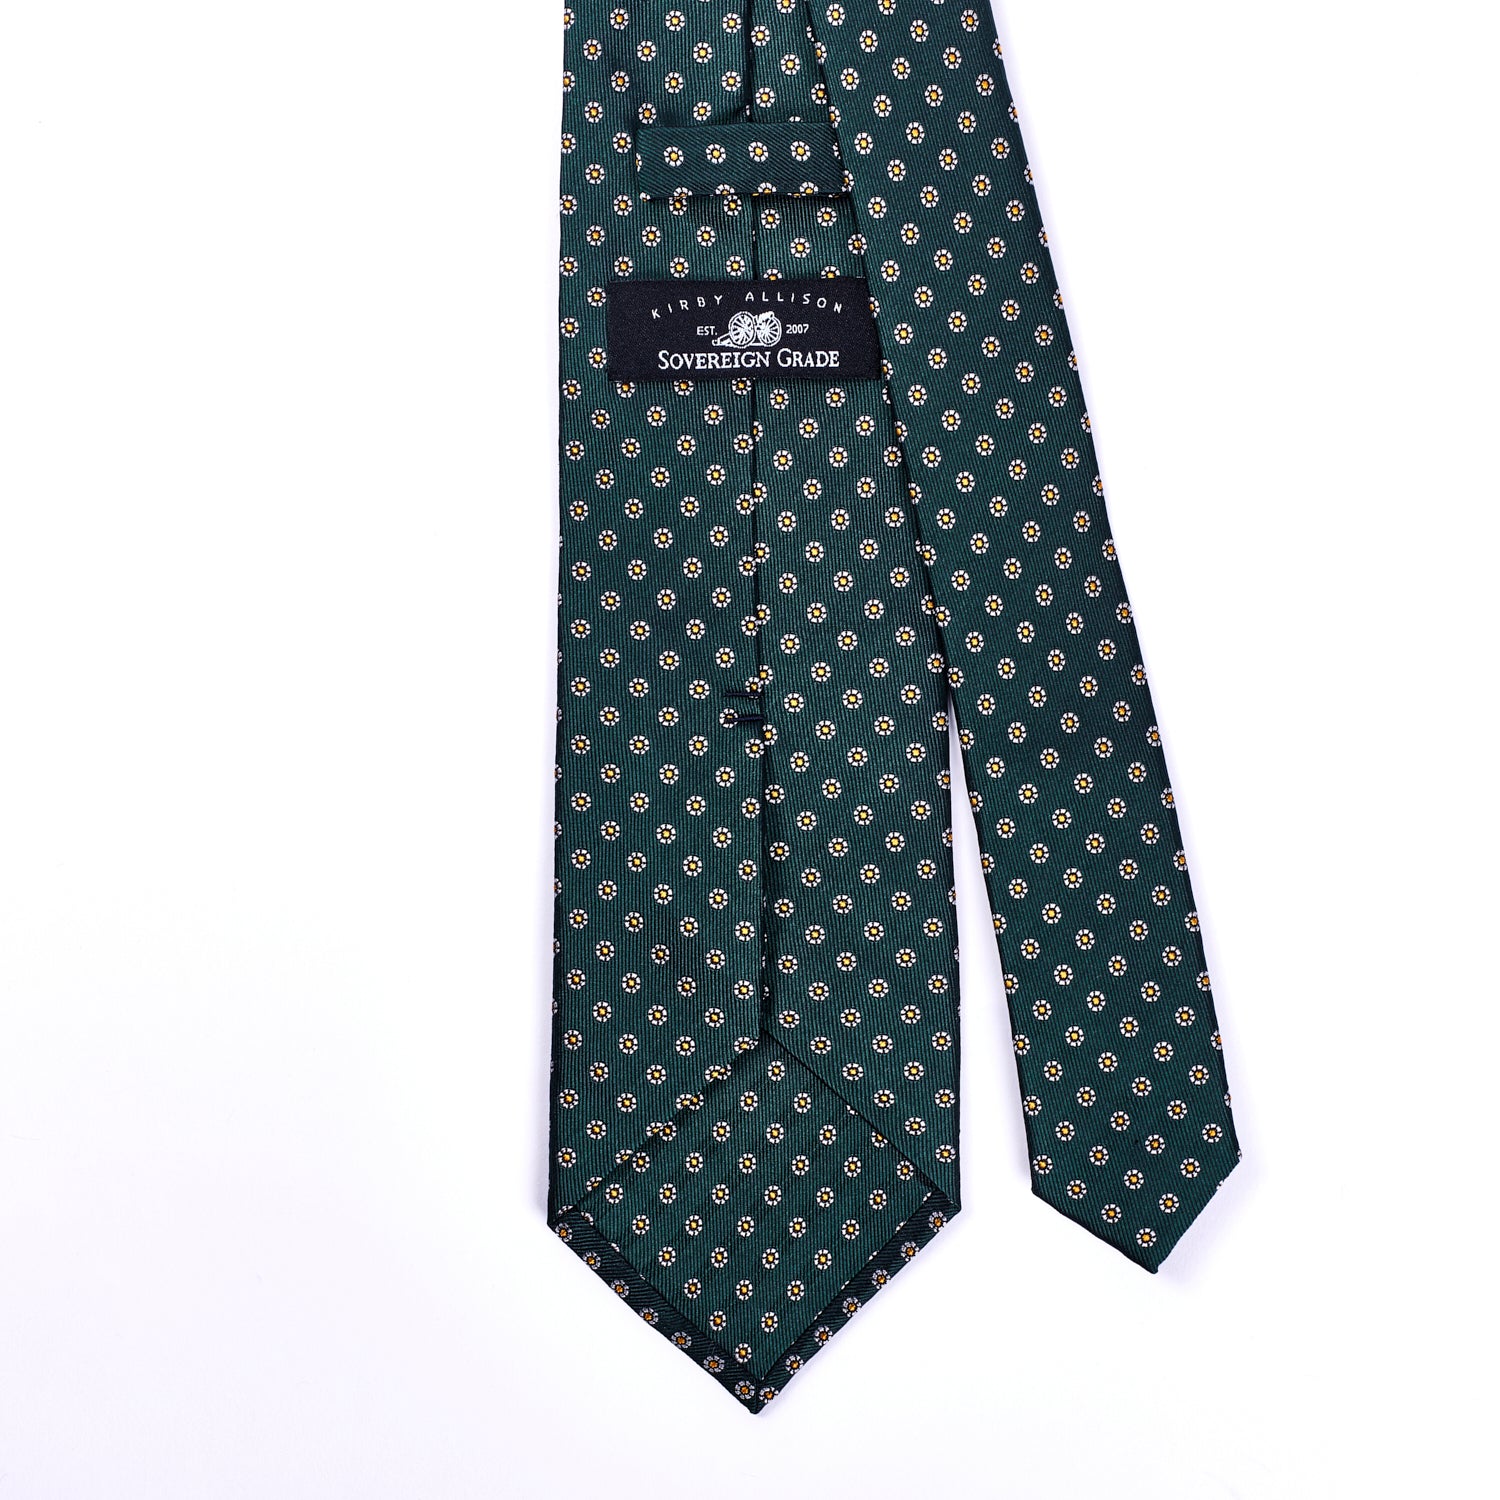 A Sovereign Grade Hunter Green Floral Jacquard Tie, 150 cm from KirbyAllison.com on a white background.